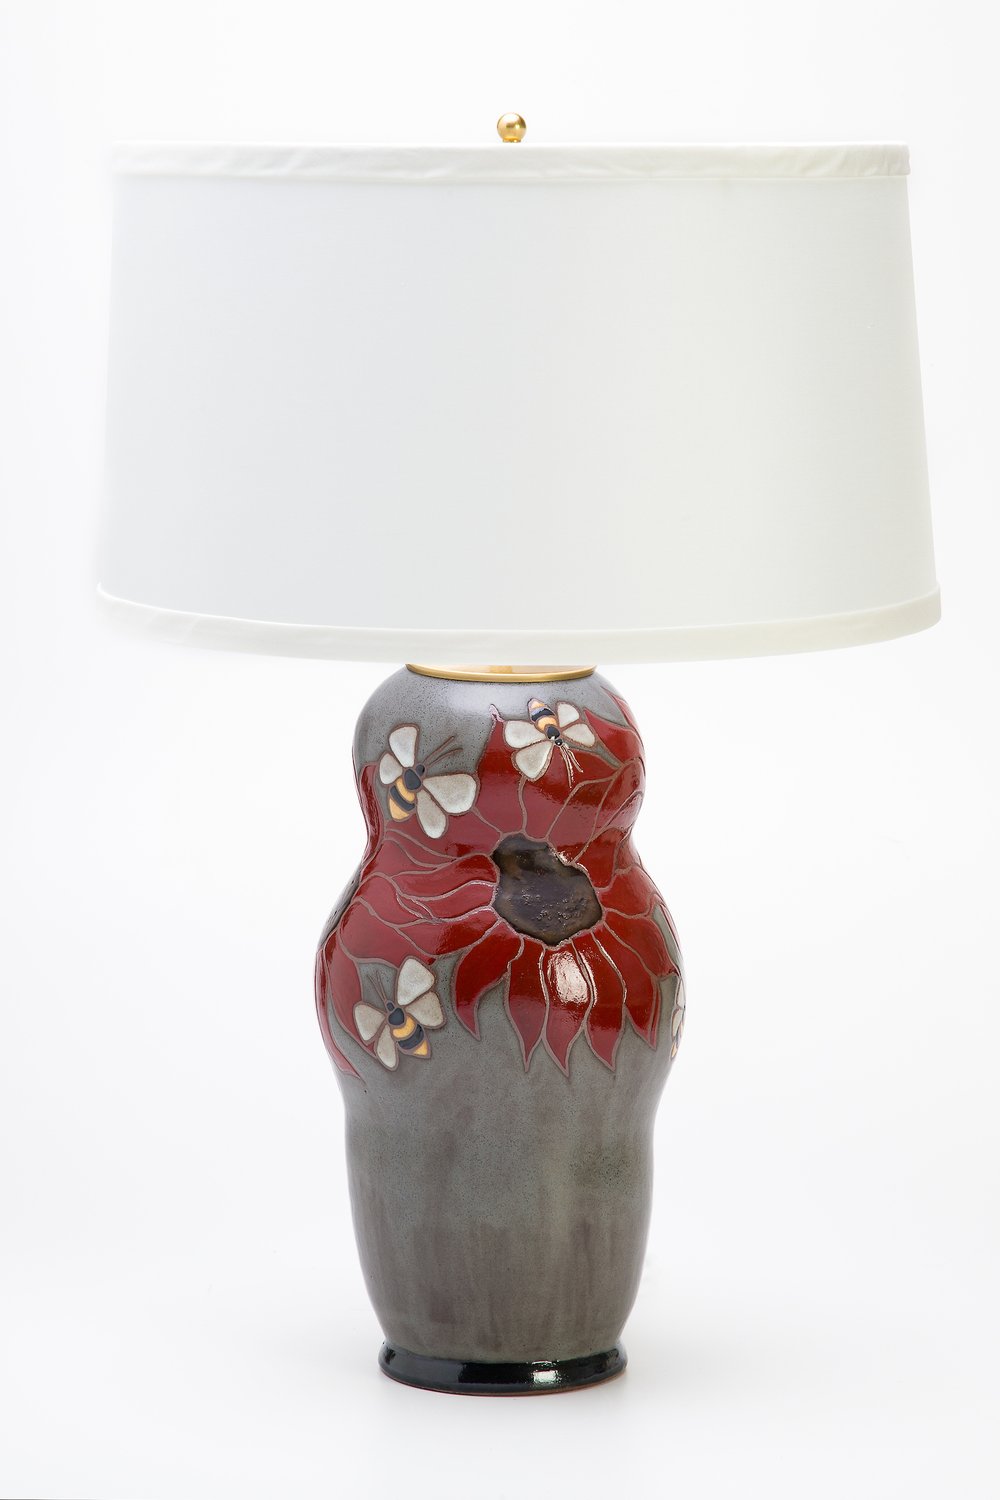 Steel Blue Table Lamp with Red Flowers and Bees